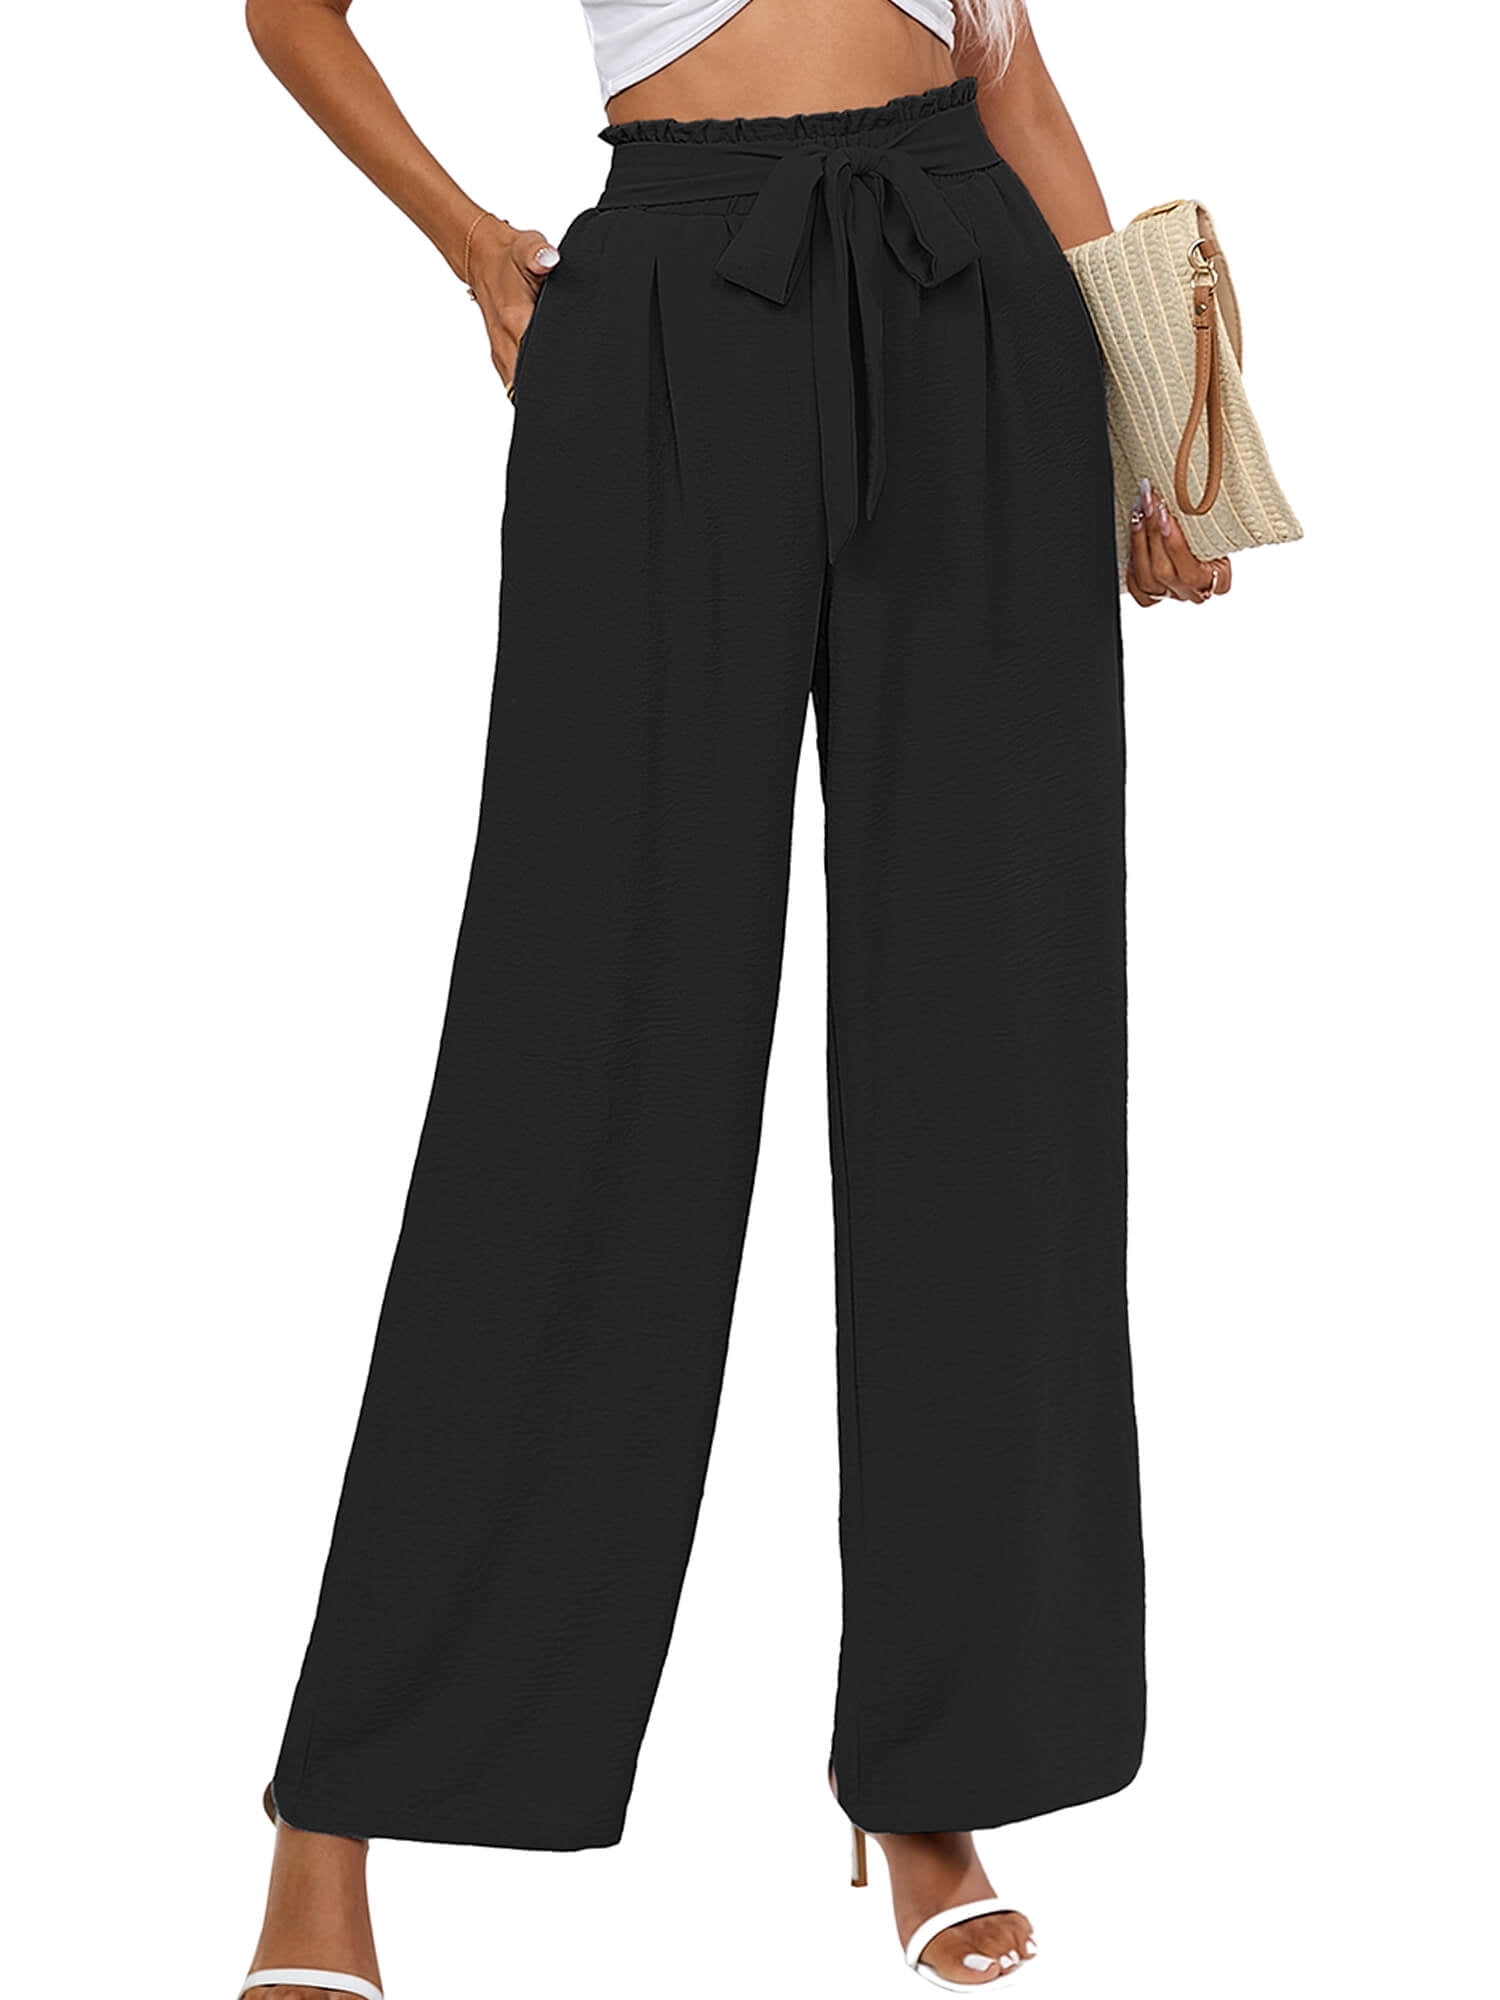 Chiclily Women's Wide Leg Pants with Pockets Lightweight High Waisted  Adjustable Tie Knot Loose Trousers Flowy Summer Beach Lounge Pants, US Size  2XL in Black 